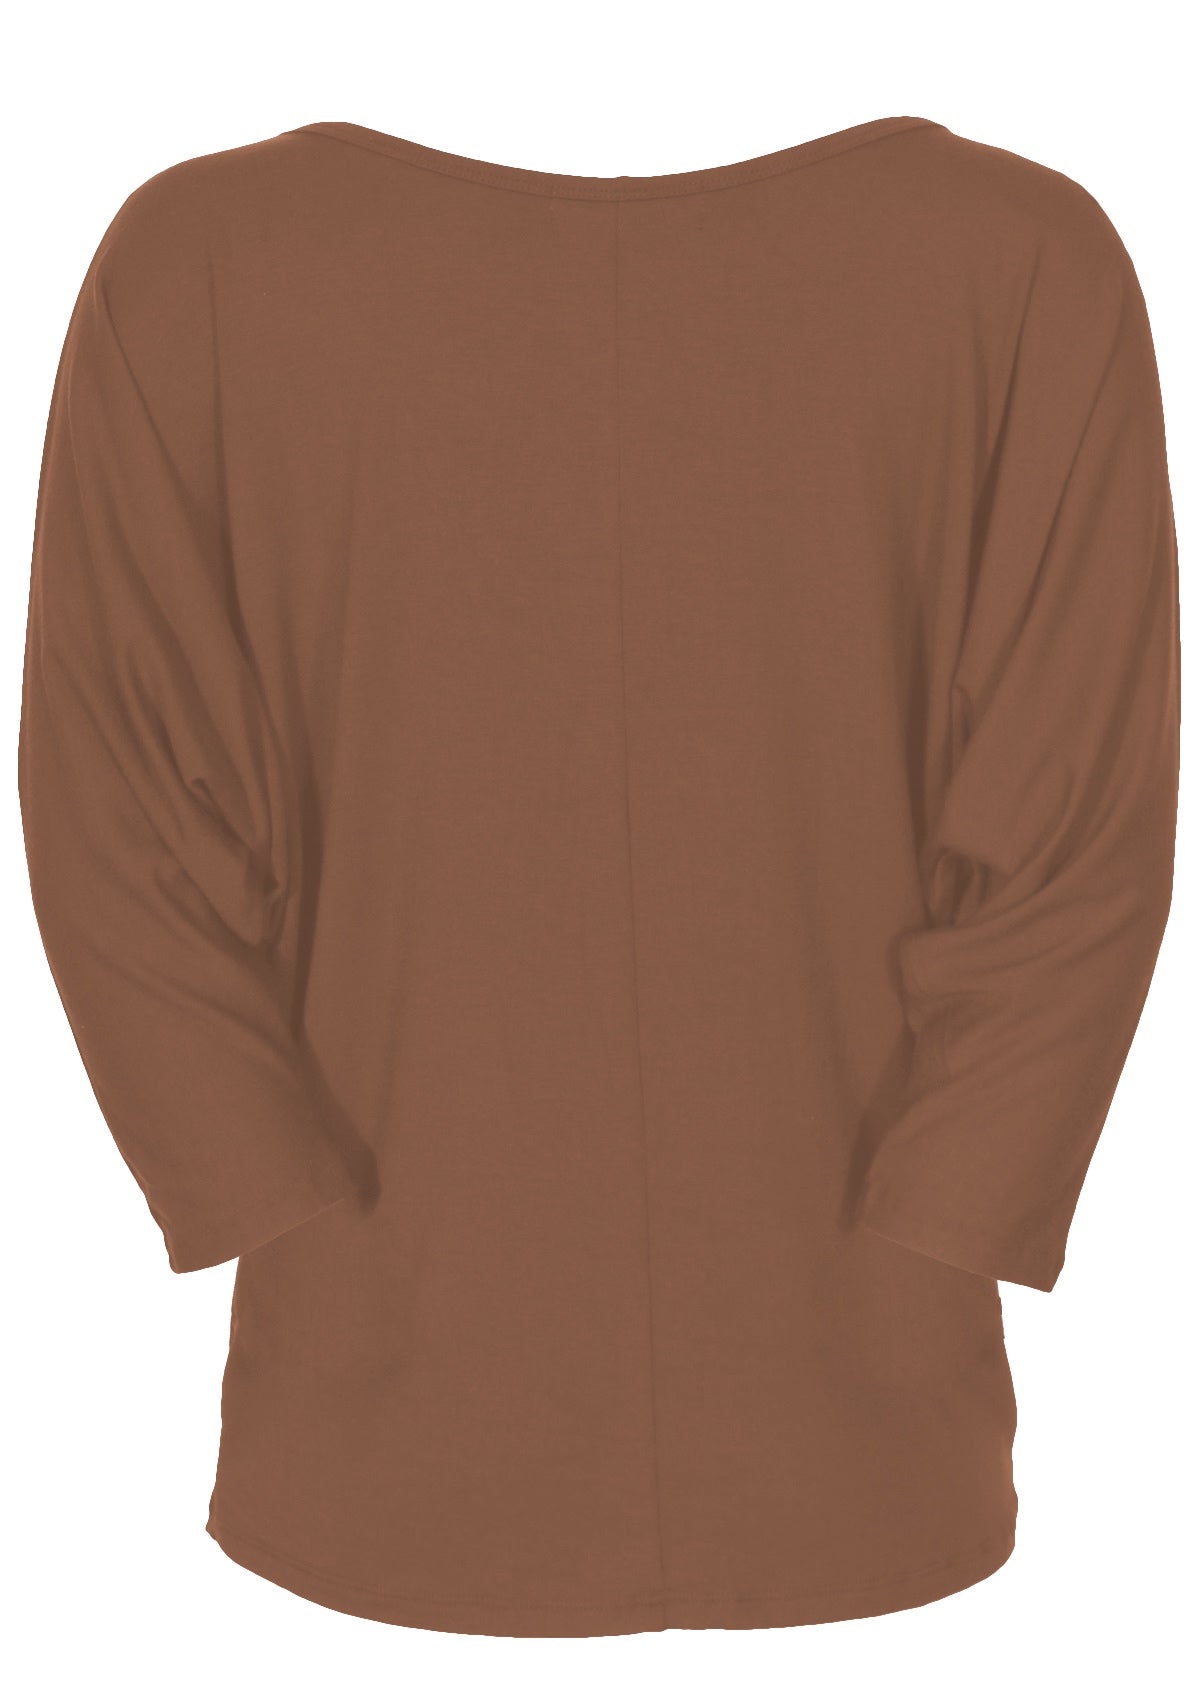 Backview of a 3/4 sleeve rayon batwing round neckline brown top.